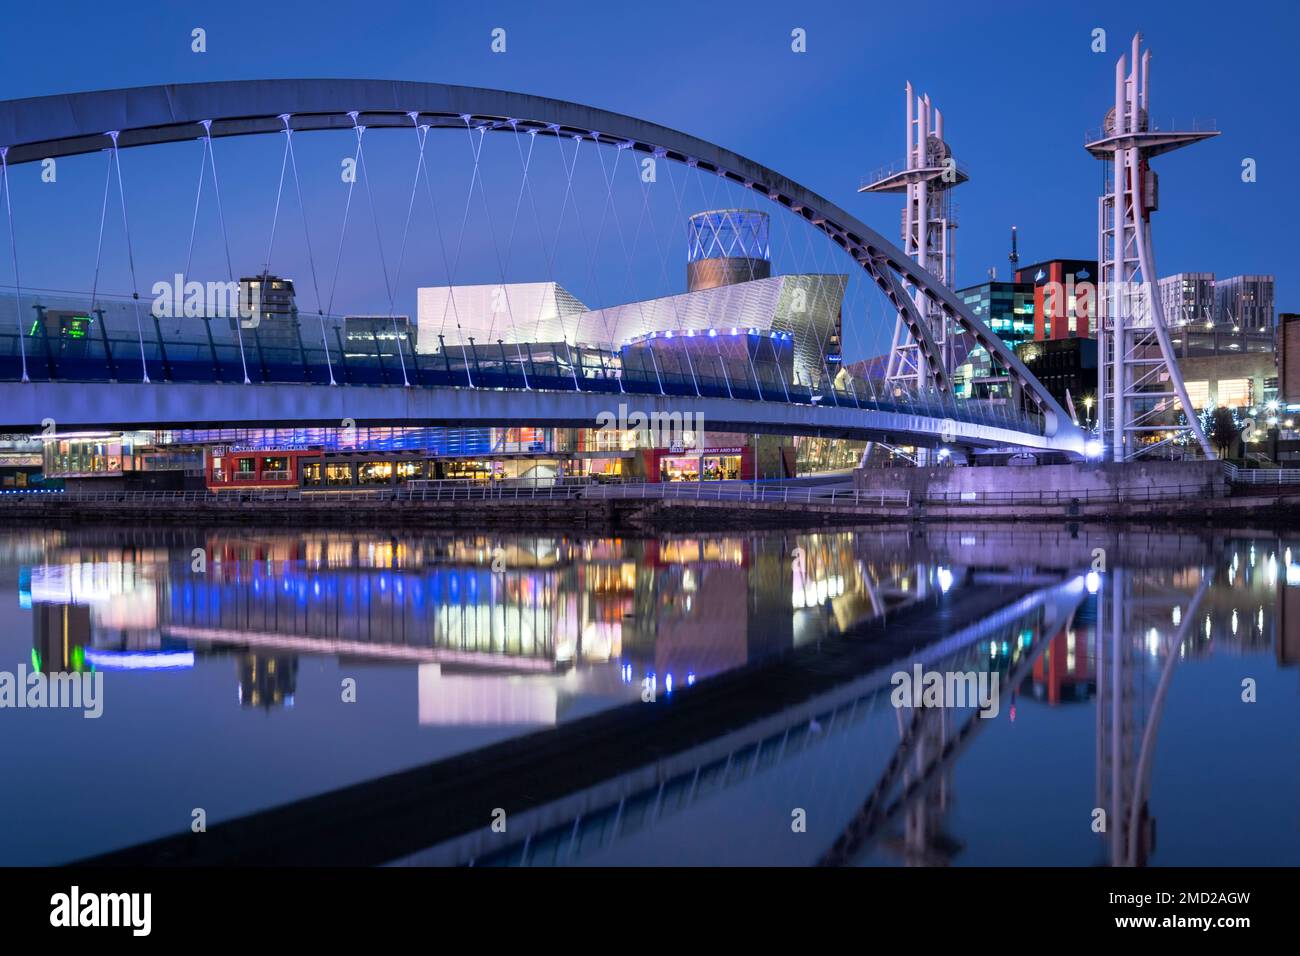 The Lowry Footbridge & Lowry Centre at Night, Salford Quays, Salford, Manchester, Angleterre, ROYAUME-UNI Banque D'Images